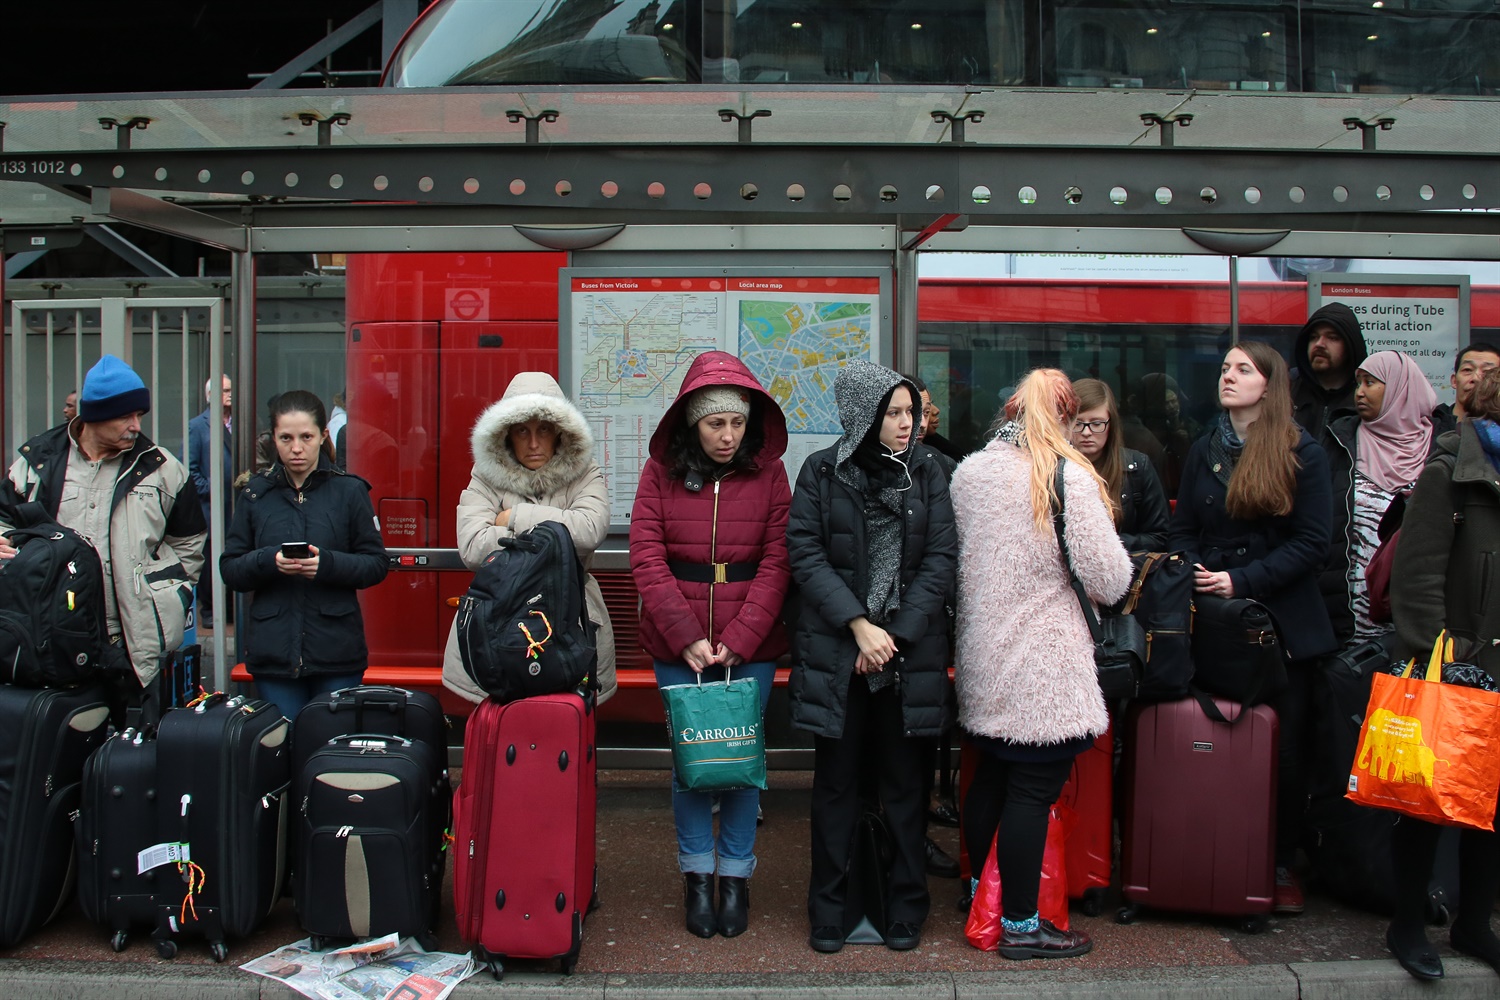 London travellers hit by crowding as Tube strike goes ahead